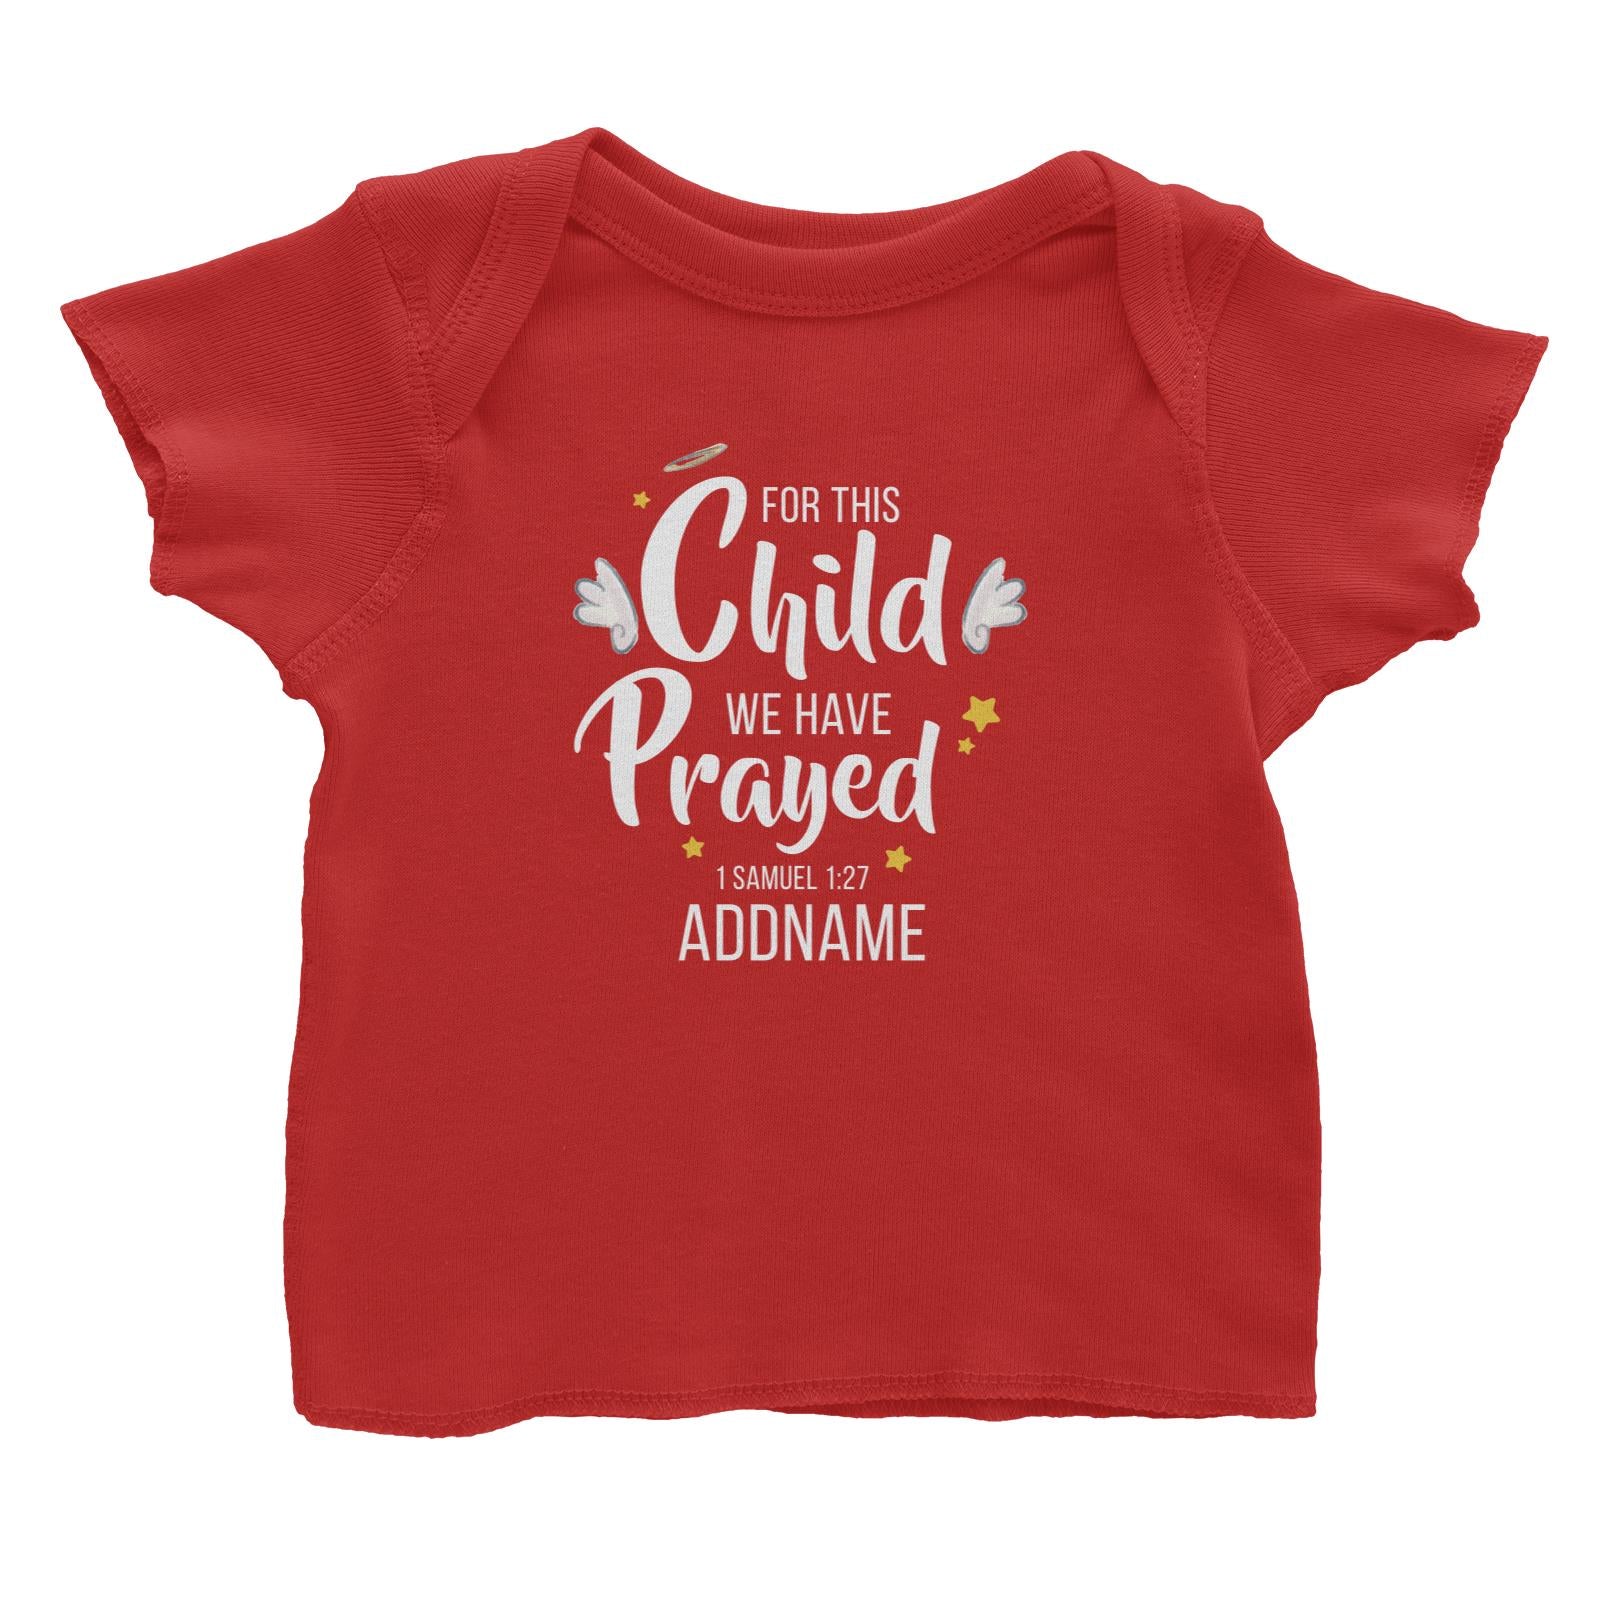 Gods Gift For This Child We Have Prayed 1 Samuel 1.27 Addname Baby T-Shirt